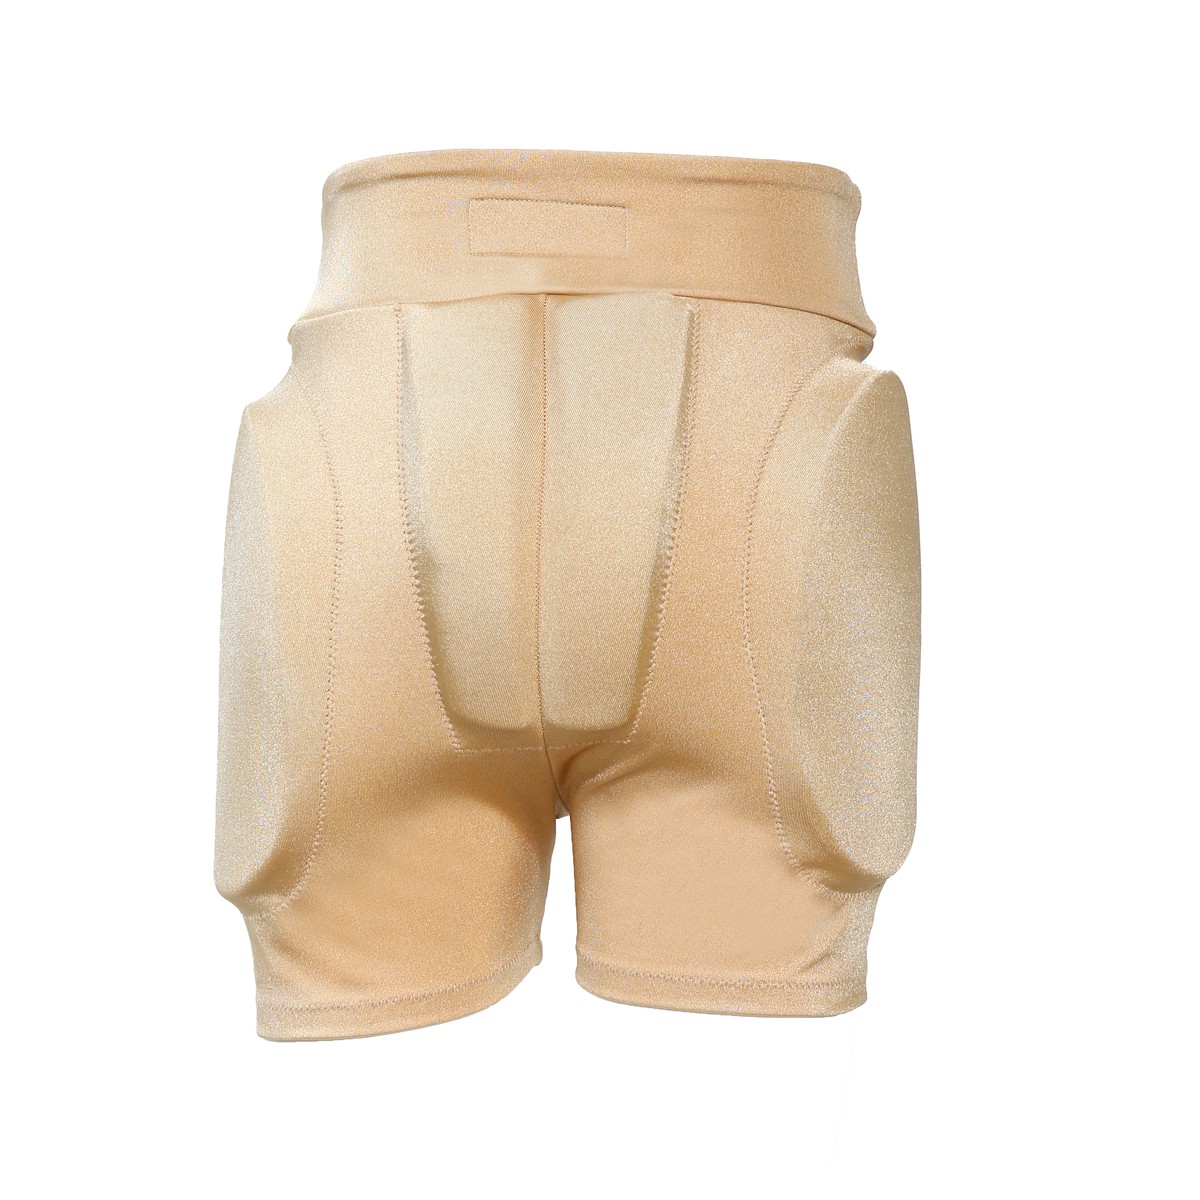 https://www.xamasglobal.com/5246-thickbox_default/classic-padded-protective-shorts.jpg